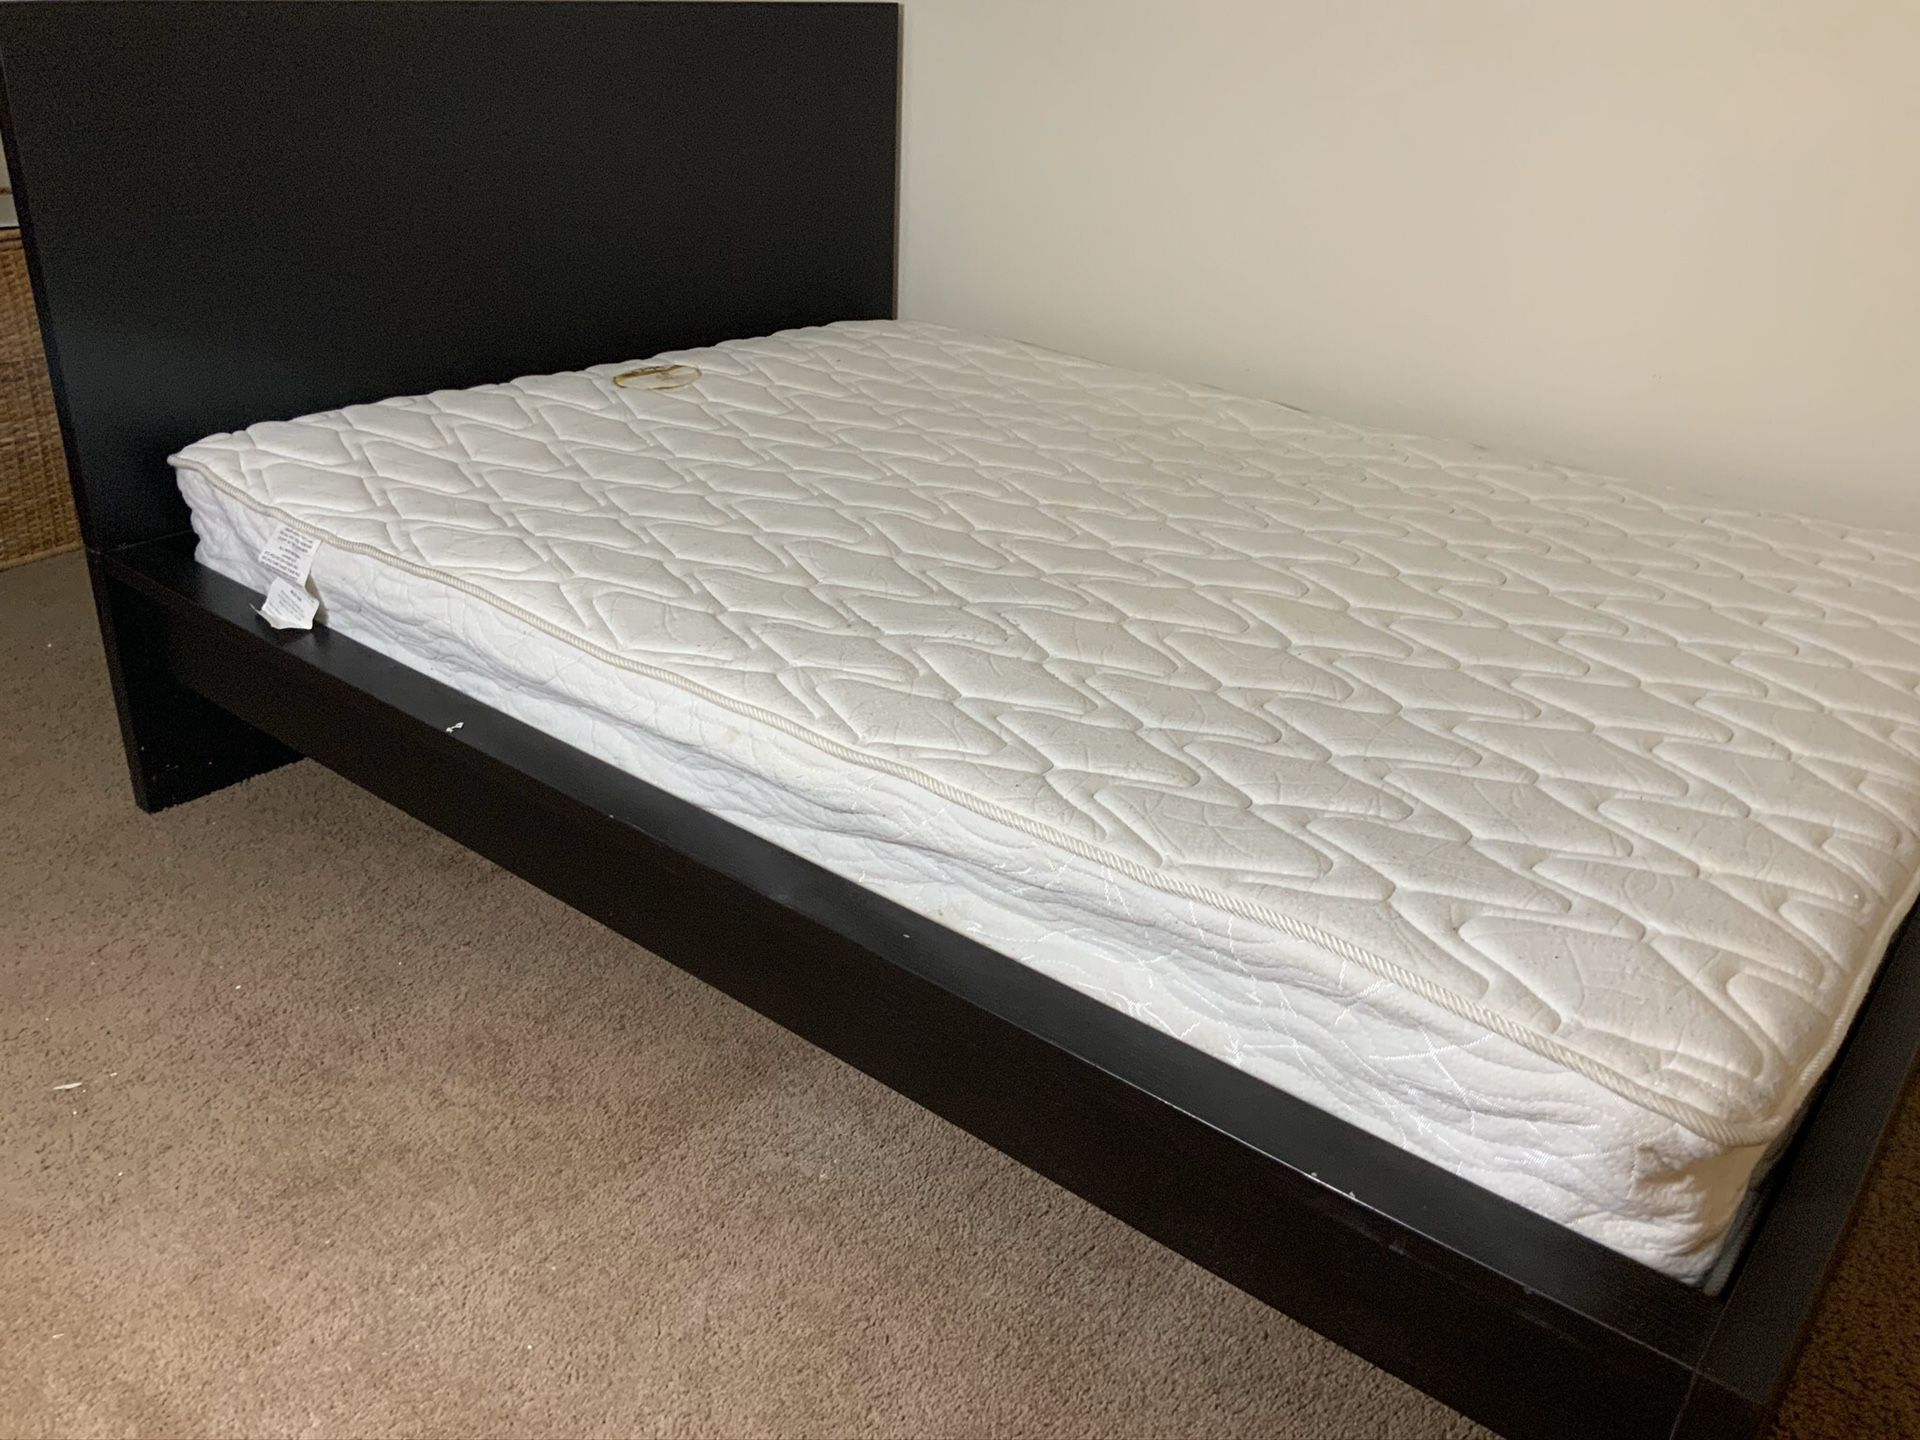 IKEA MALM Queen bed frame and mattress